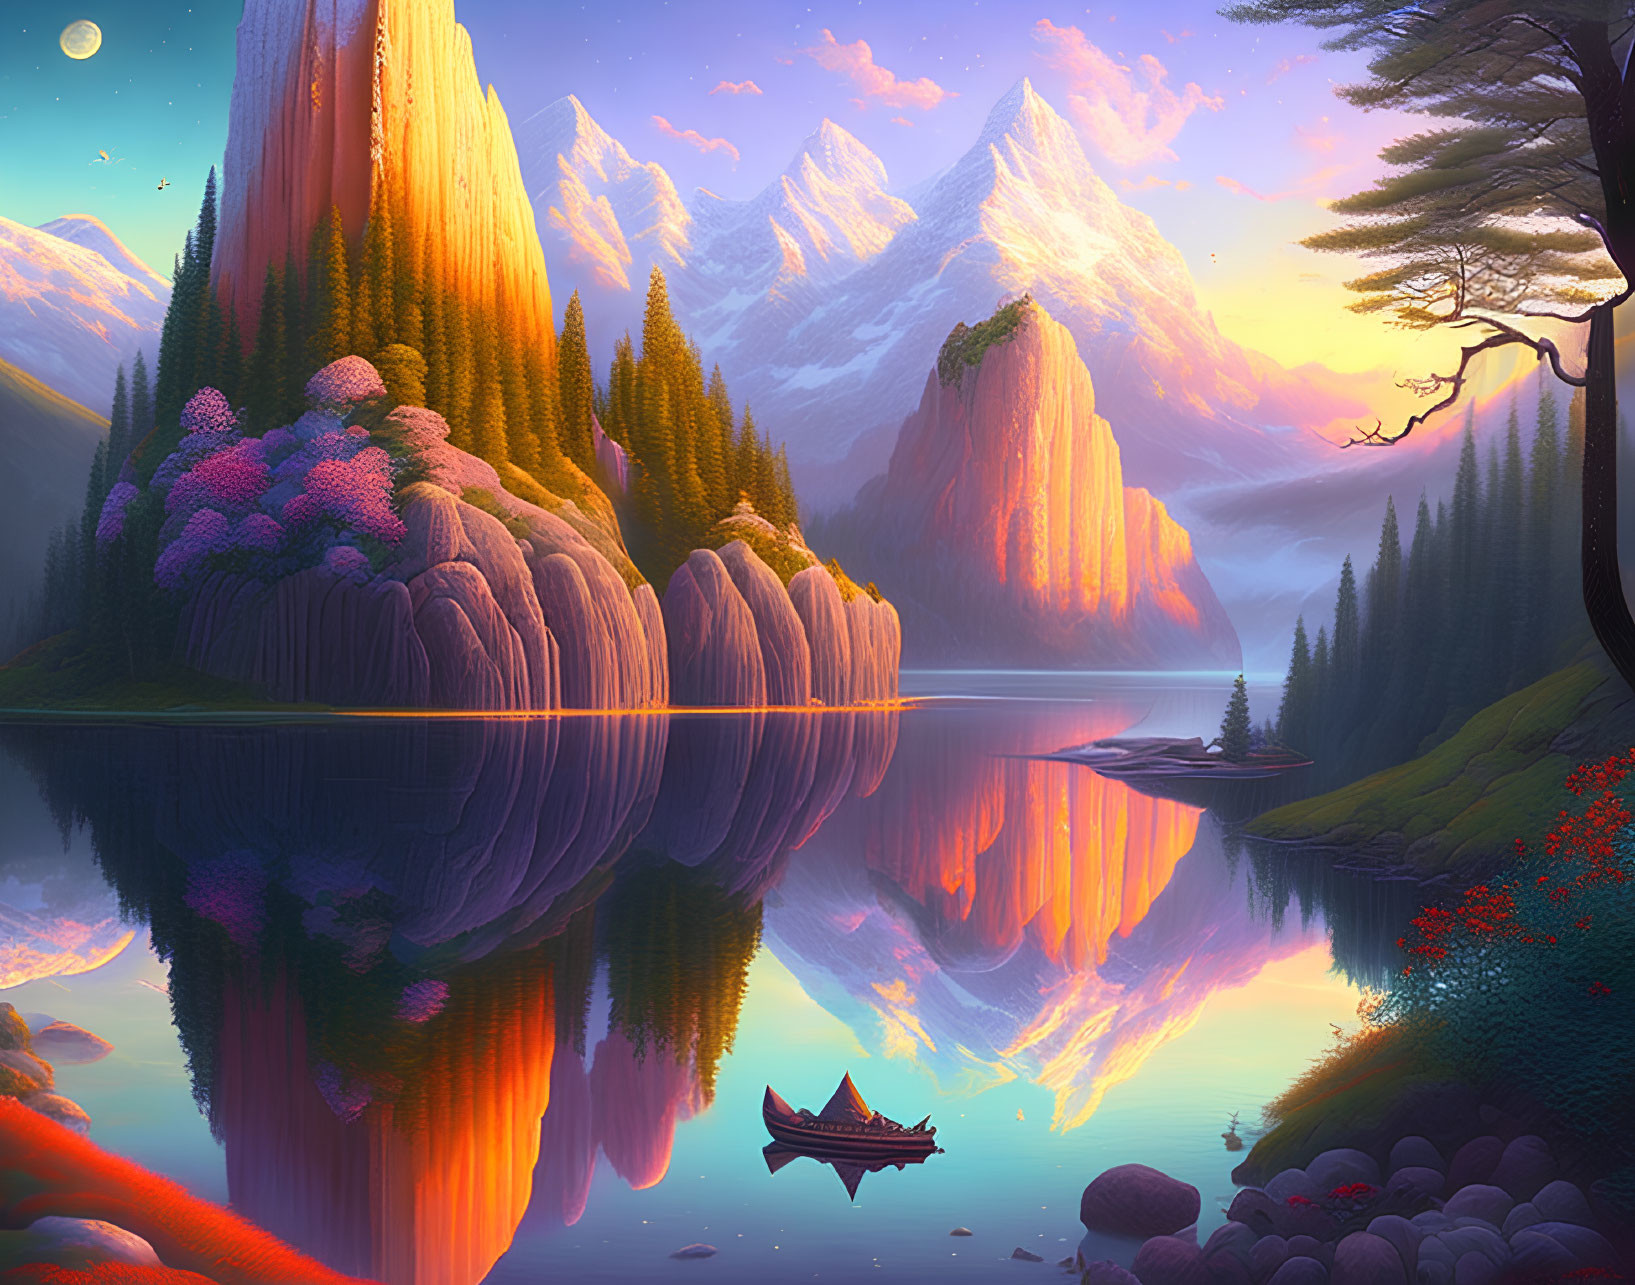 Tranquil lake with mountains, trees, and boat at sunset